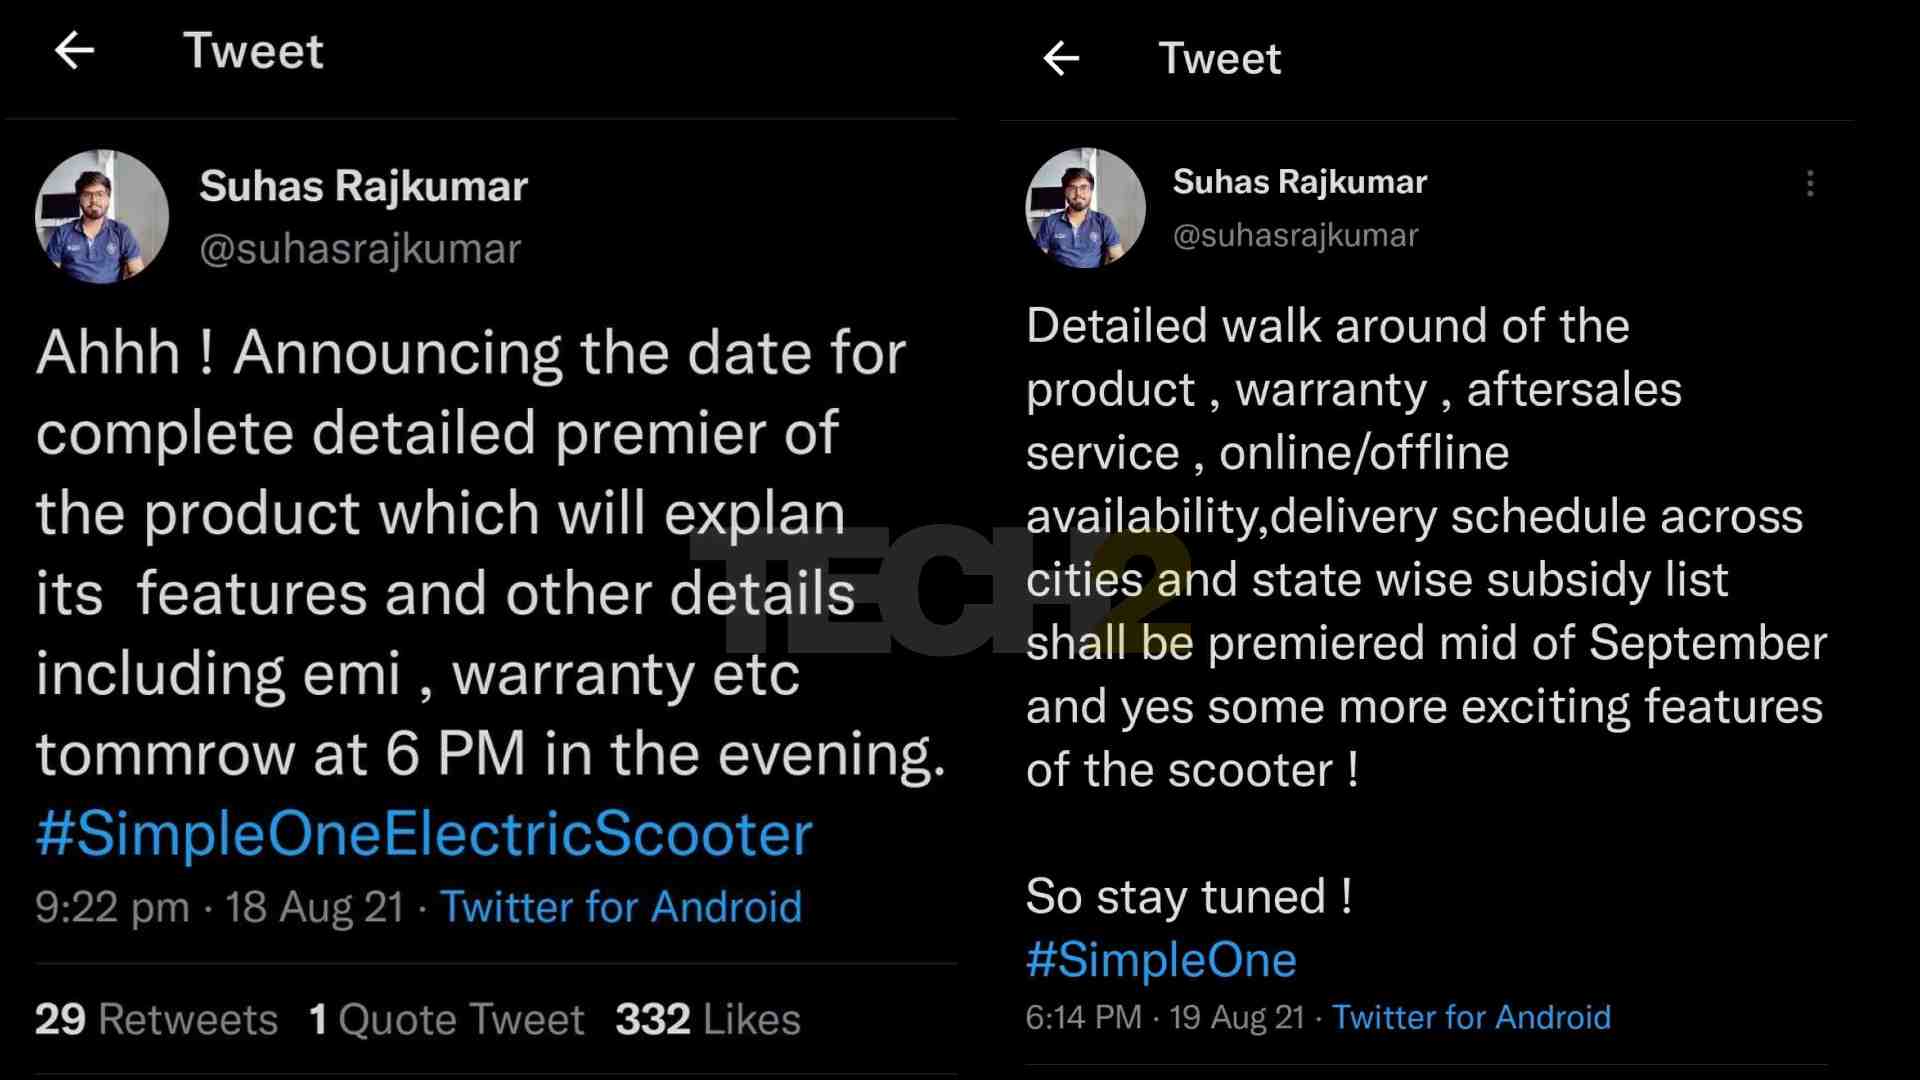 Rajkumar has simply removed the tweets associated with one-on-one advertising, creating mistrust in buyers' minds.